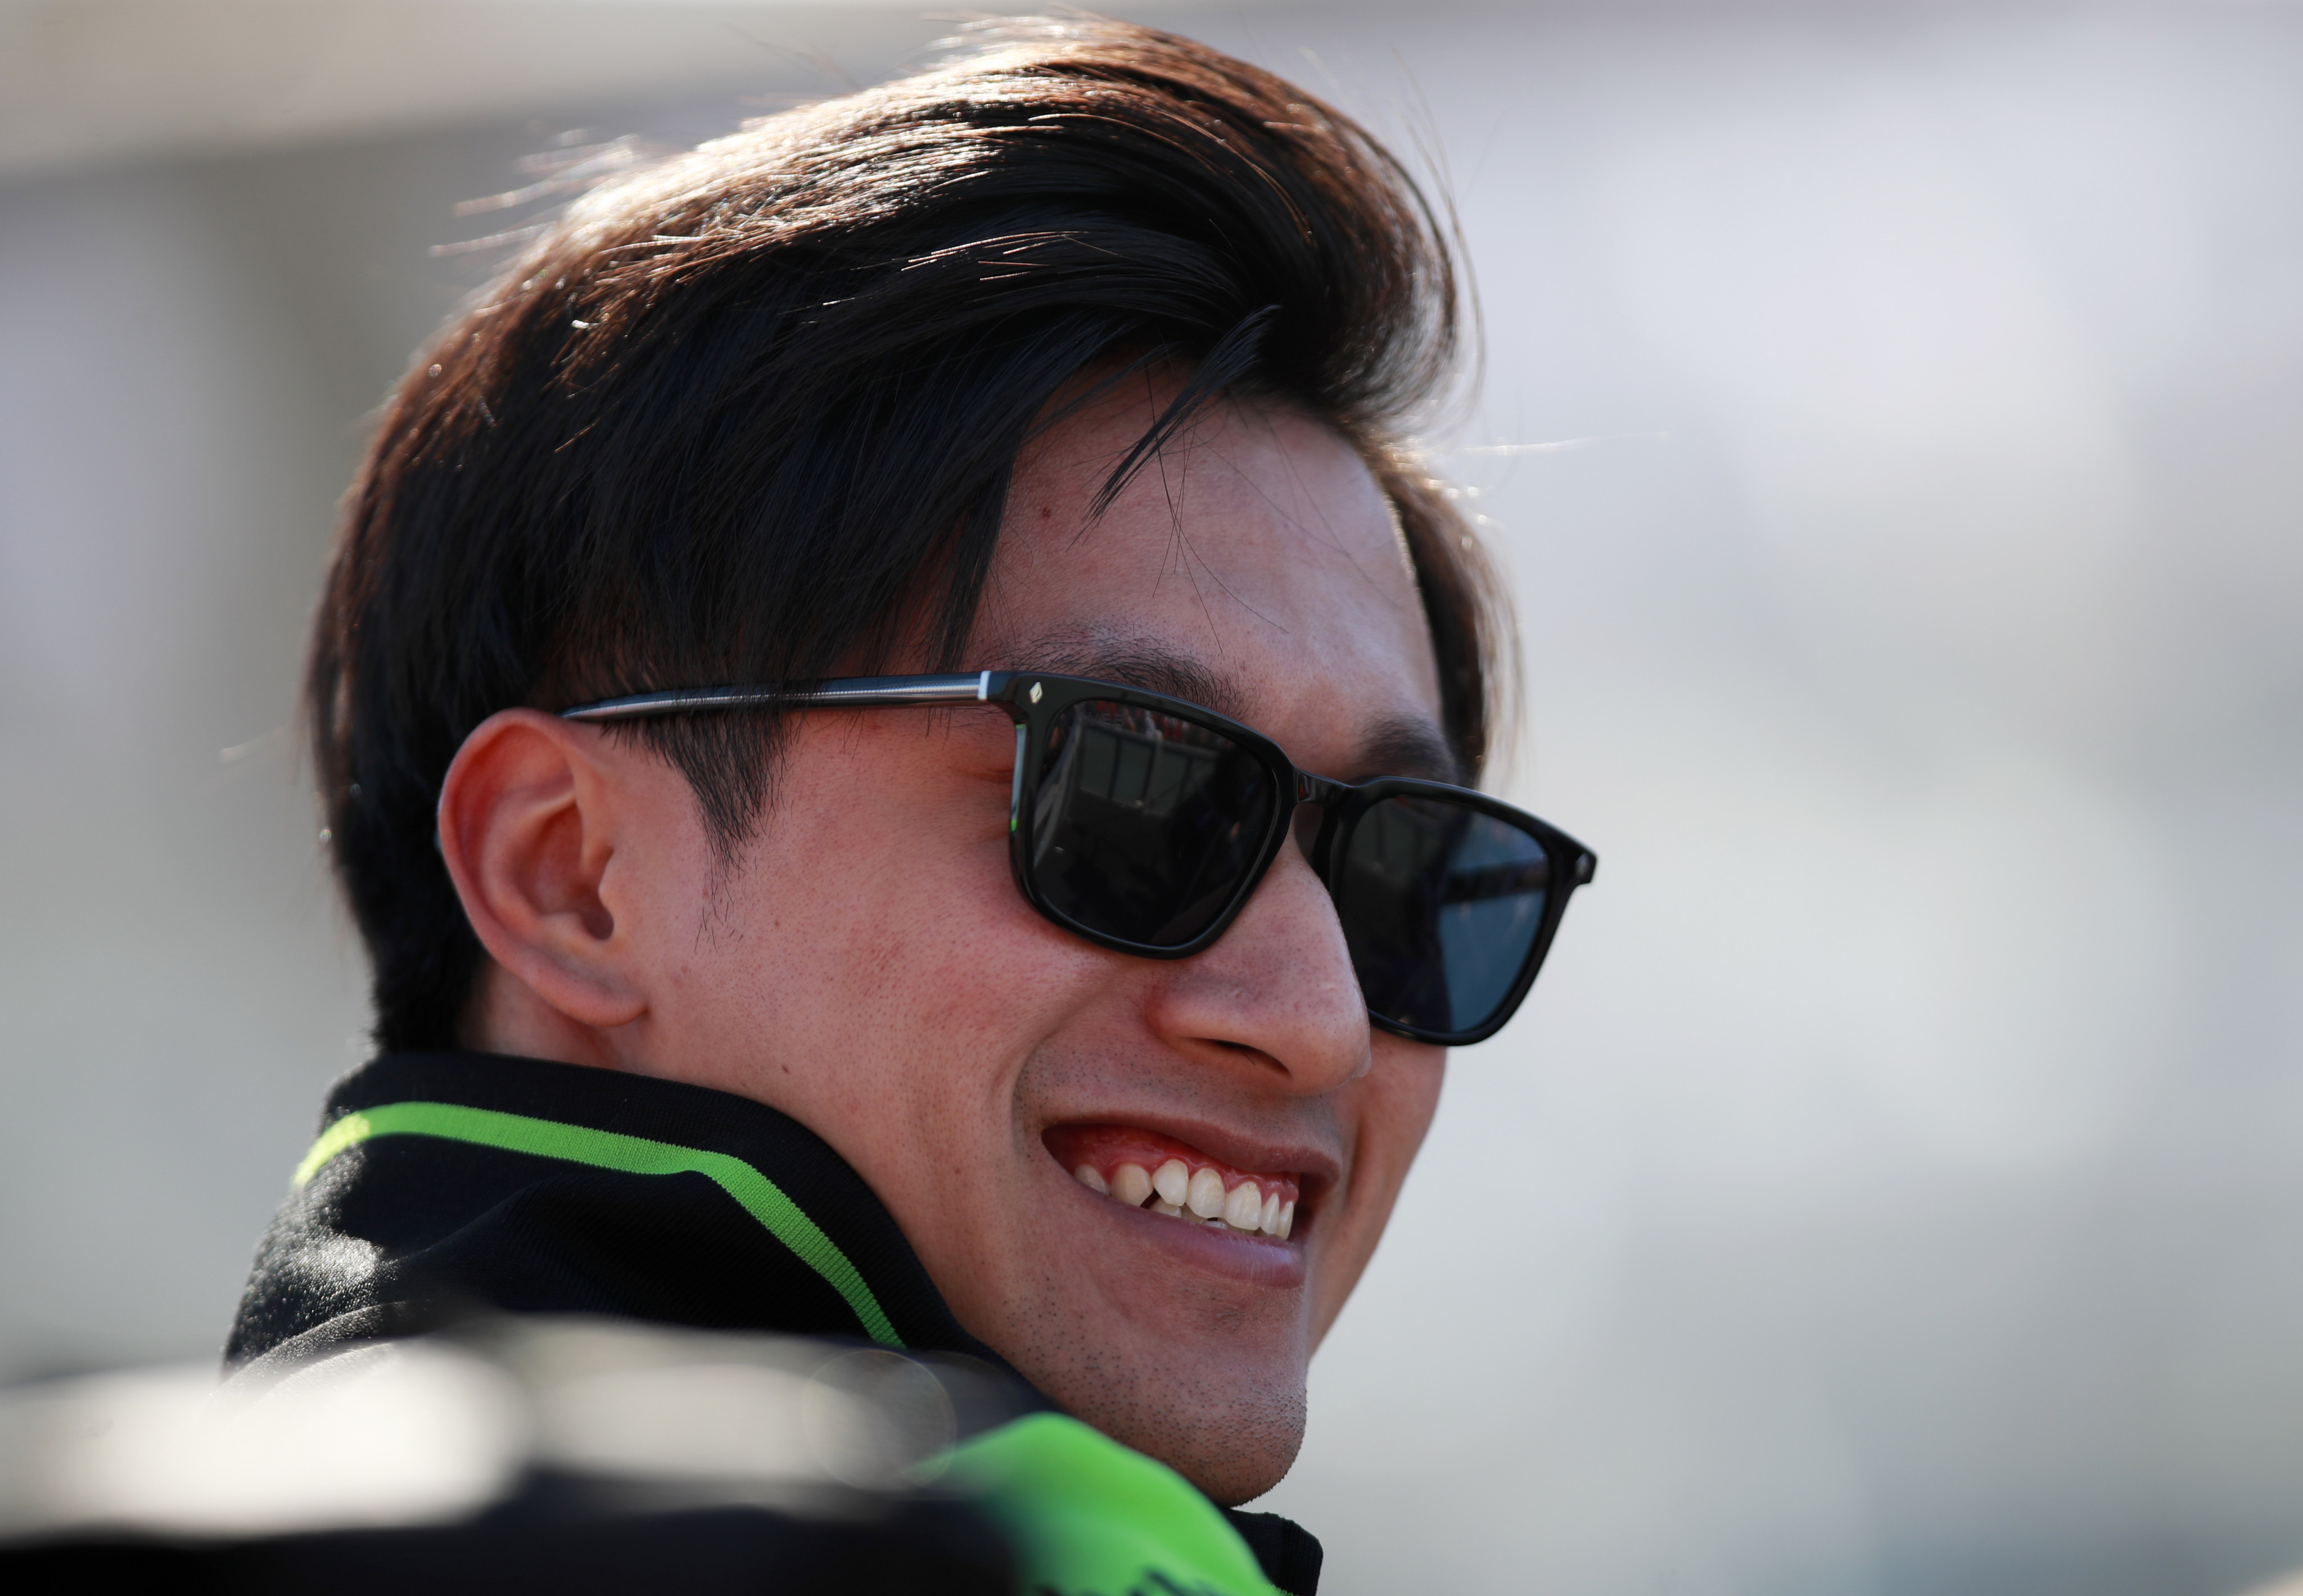 Zhou’s arrival in Shanghai is set to make huge waves, with a movie-style documentary on his career released two days before the race. Photo: Xinhua